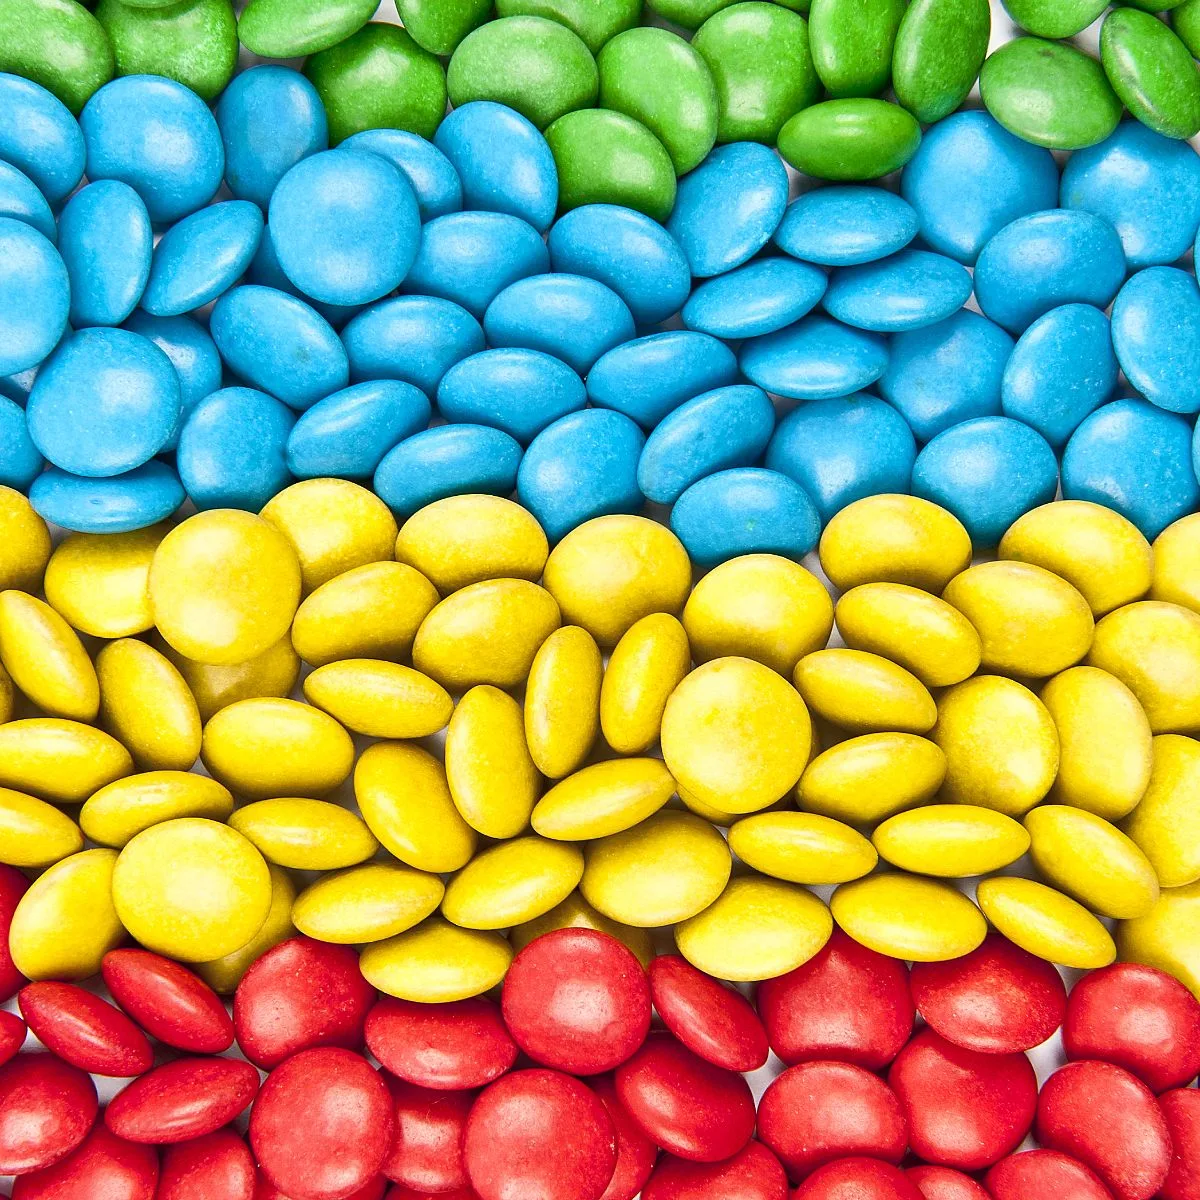 How Many M&Ms In A Bags